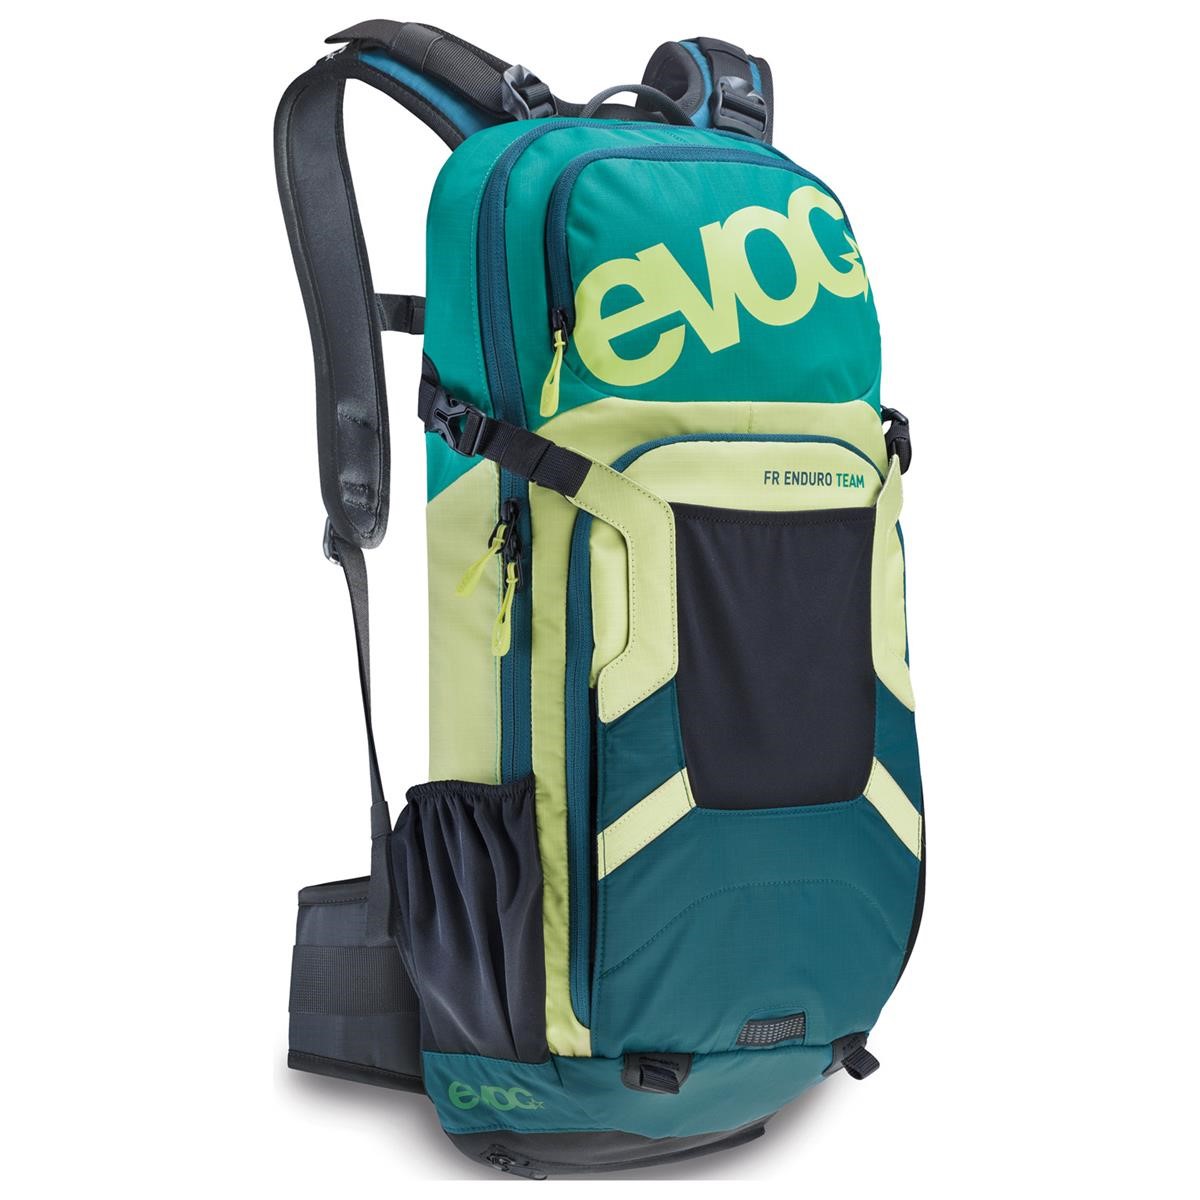 Evoc Protector Backpack with Hydration System Compartment FR Enduro Team - Green/Lime/Petrol, 16 Liter